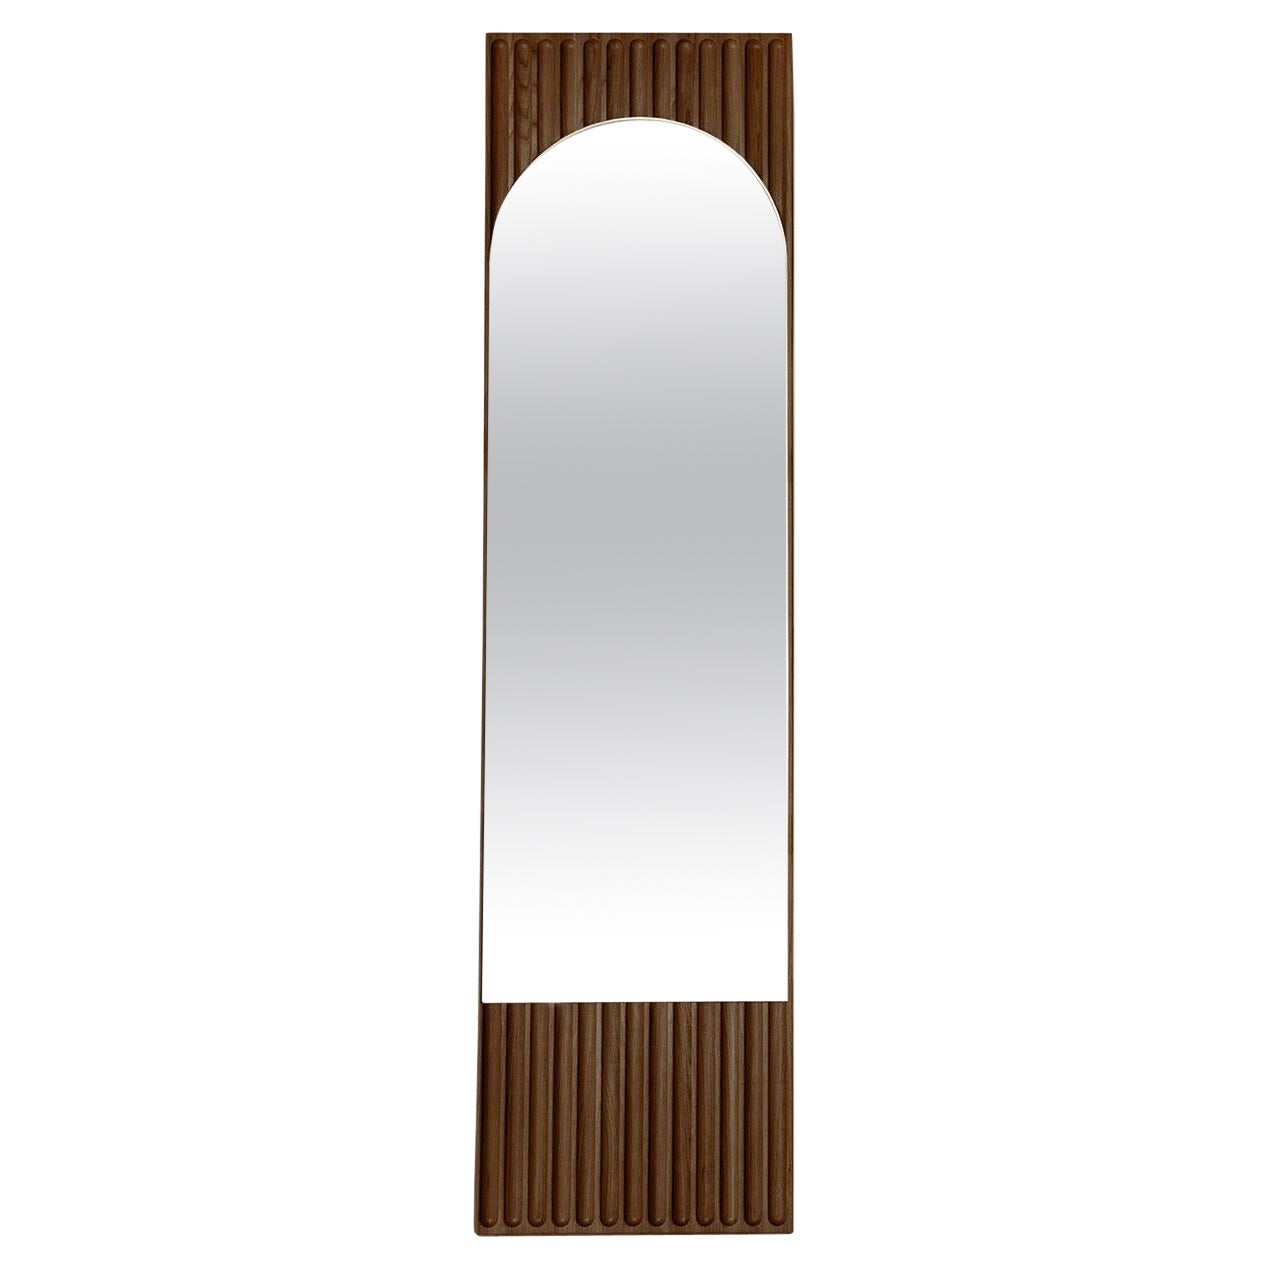 Tutto Sesto Solid Wood Rectangular Mirror, Ash in Brown Finish, Contemporary For Sale